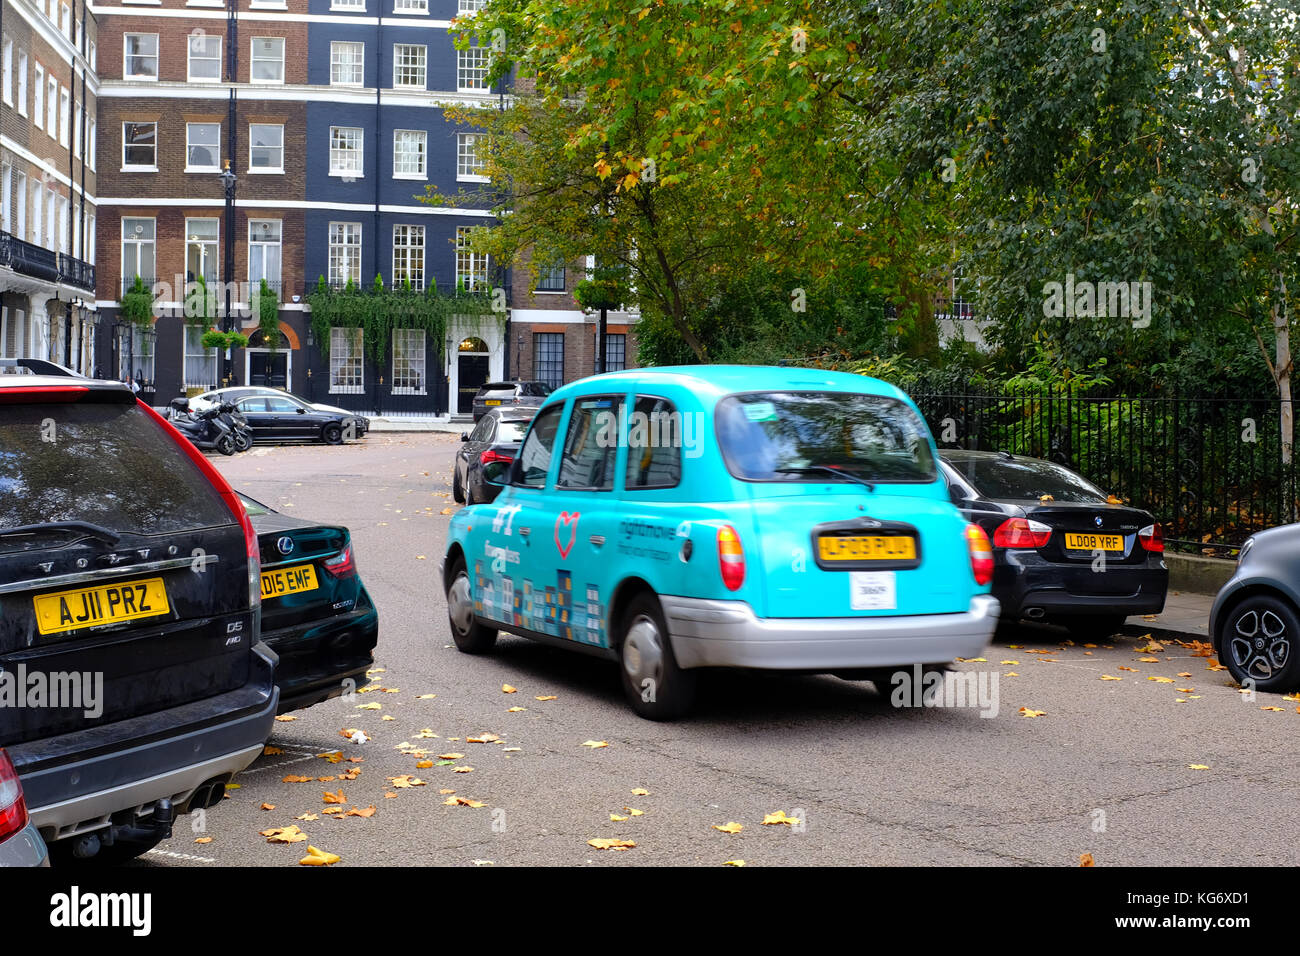 Taxi driving around Manchester Square, London UK Stock Photo